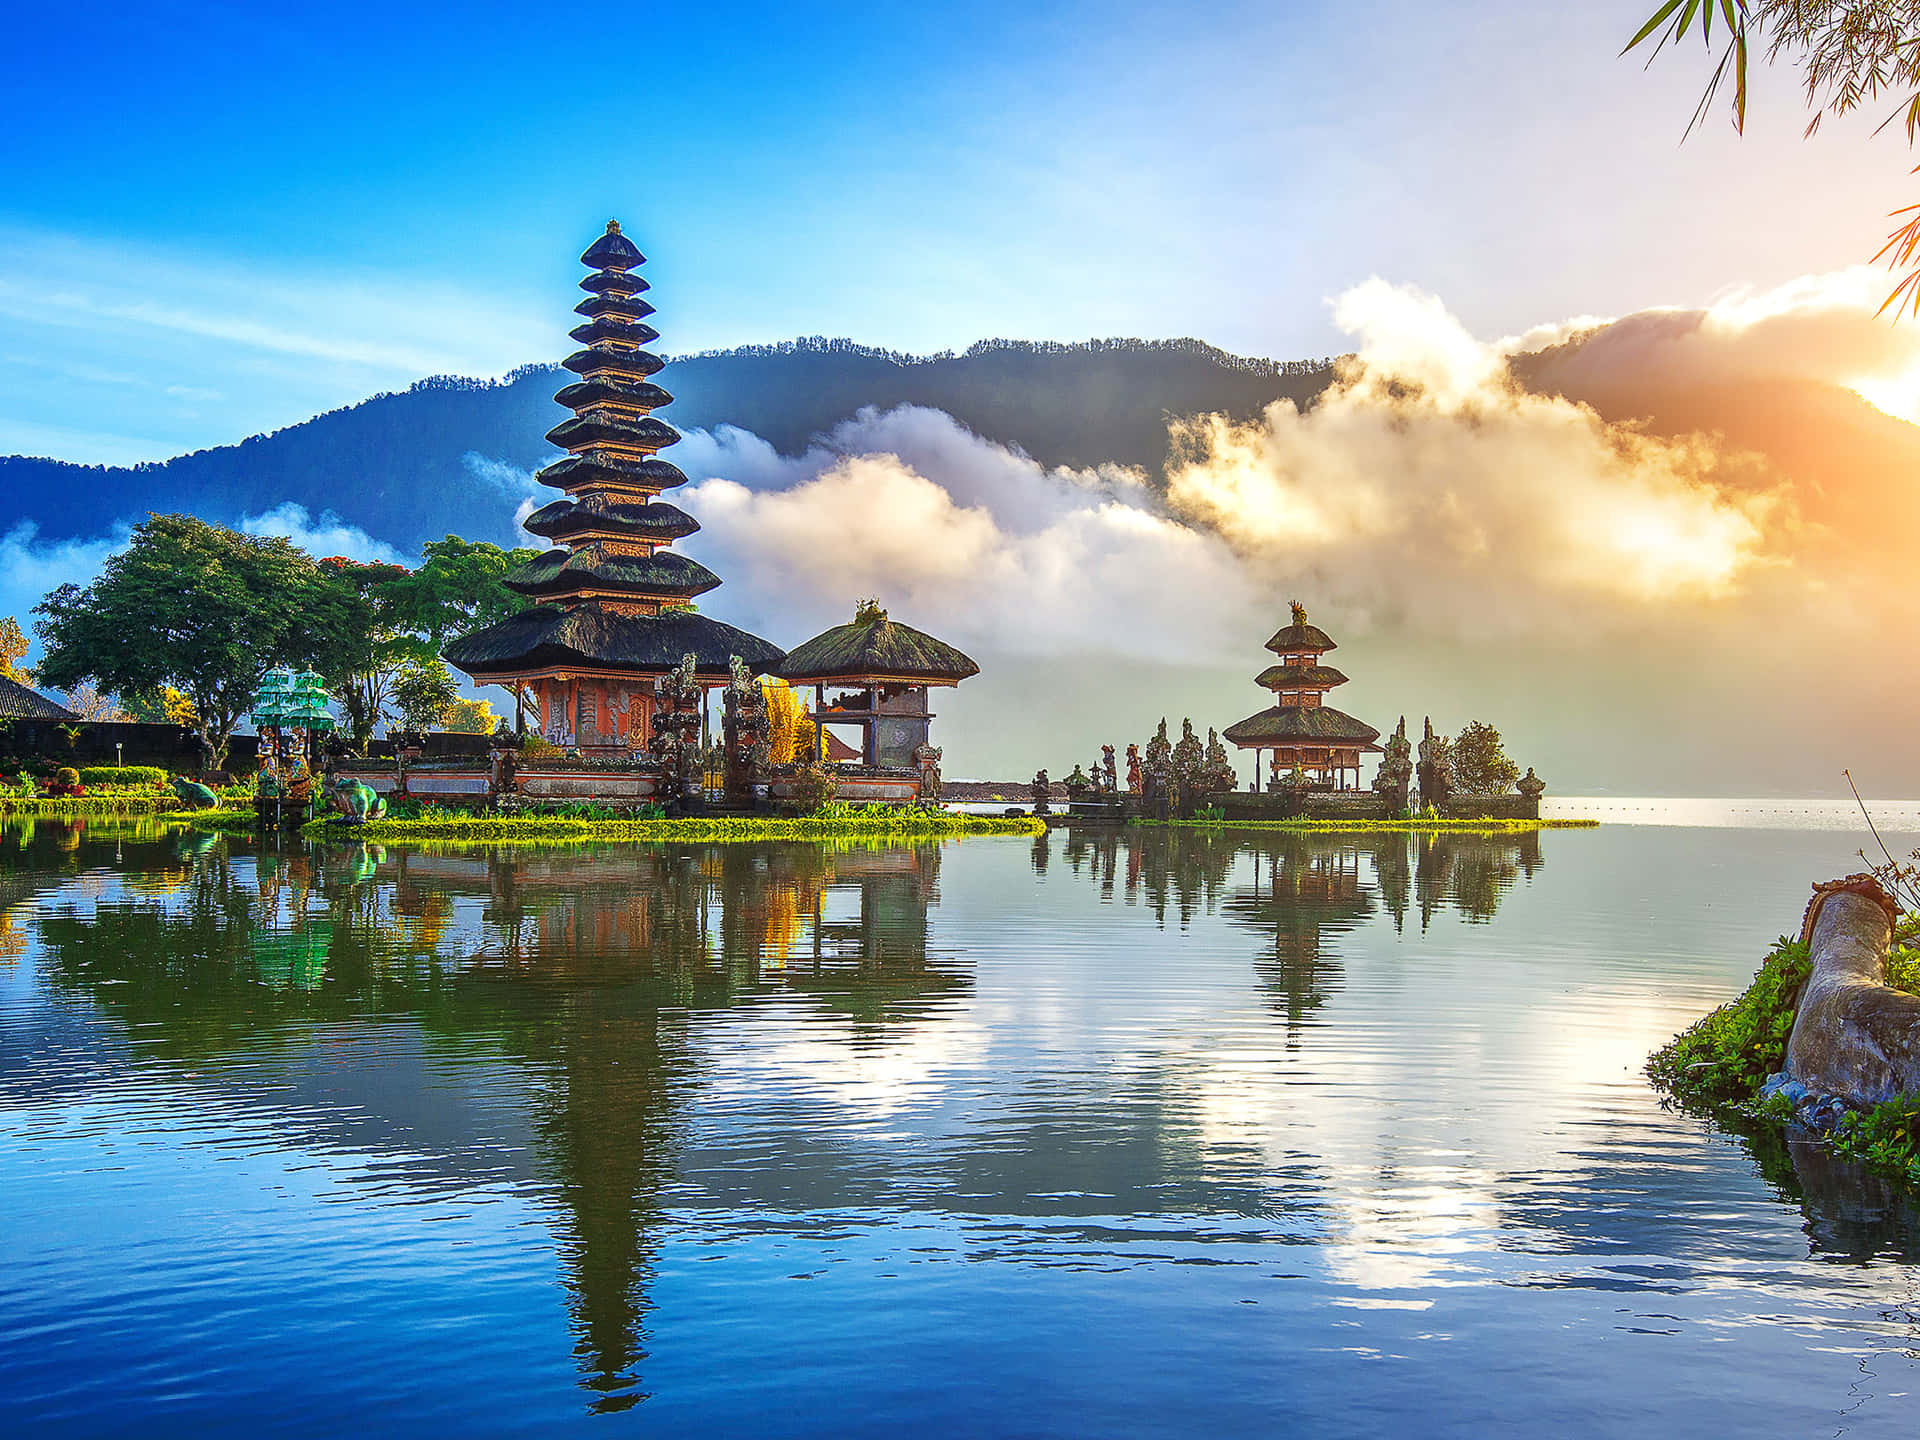 Sunrise Over A Lake With Temples In The Background